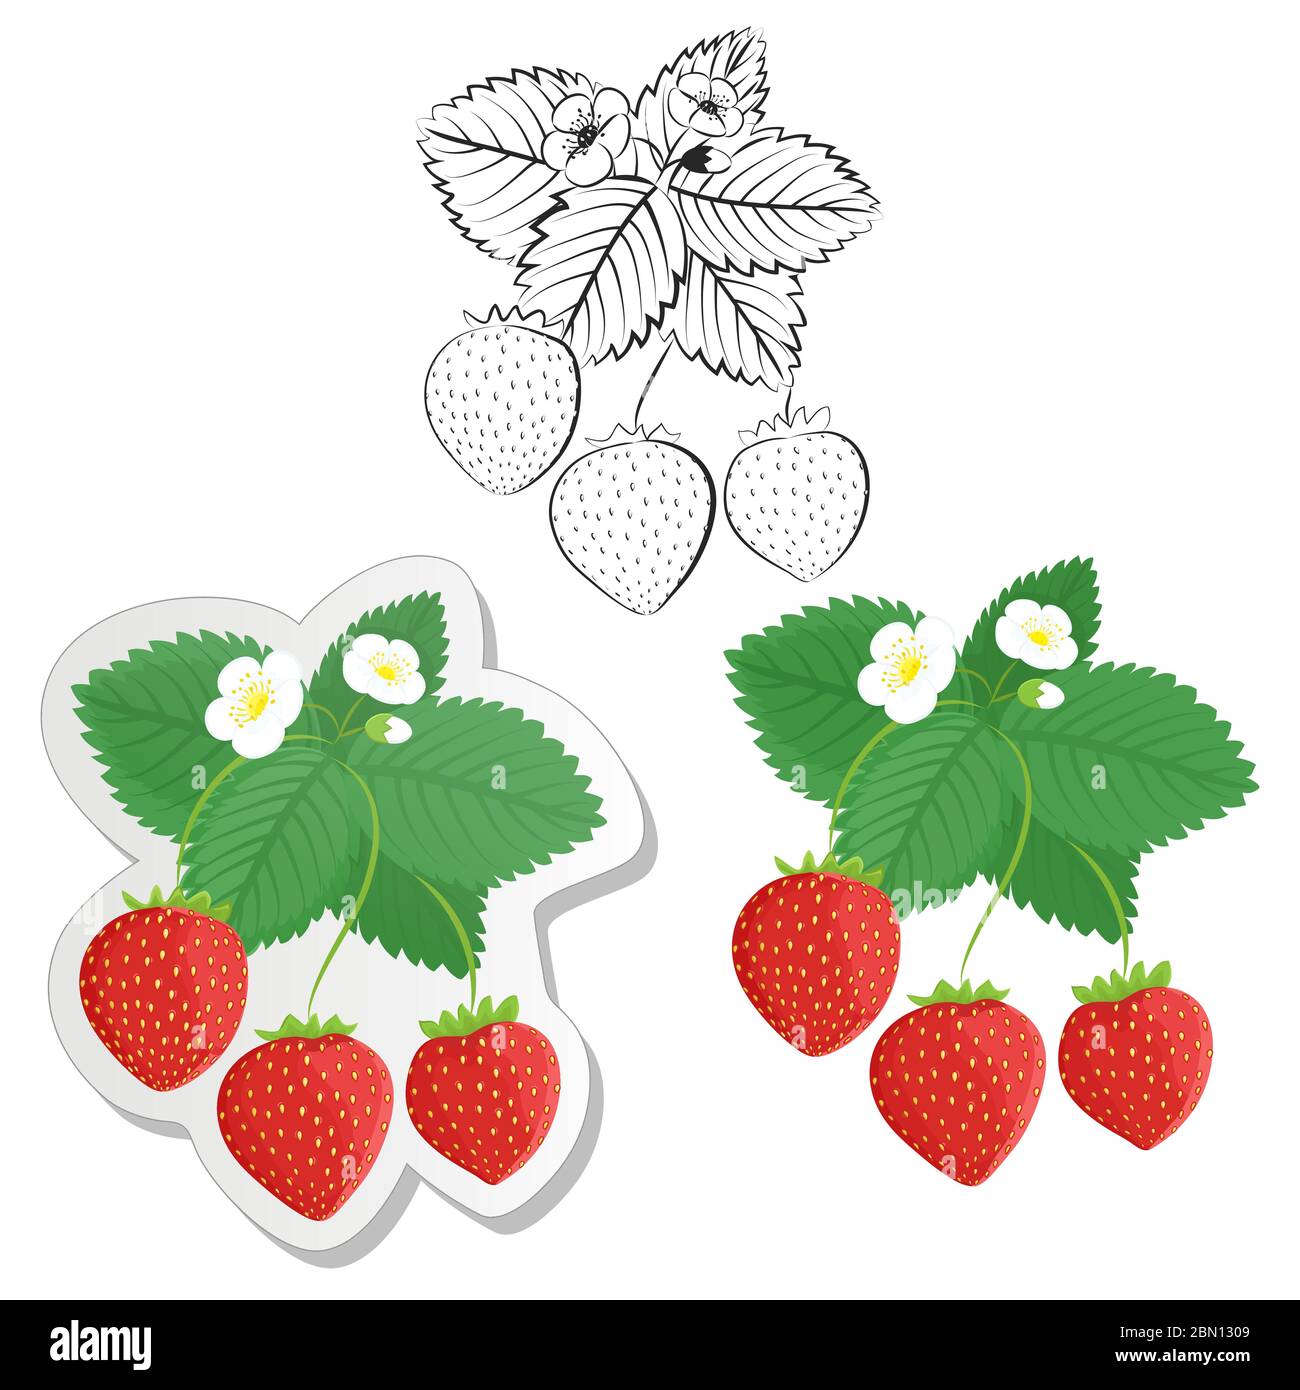 Strawberry plant and berries set. Collection of color, contour and sticker strawberries. Vector strawberries set isolated on white background. Fruit a Stock Vector